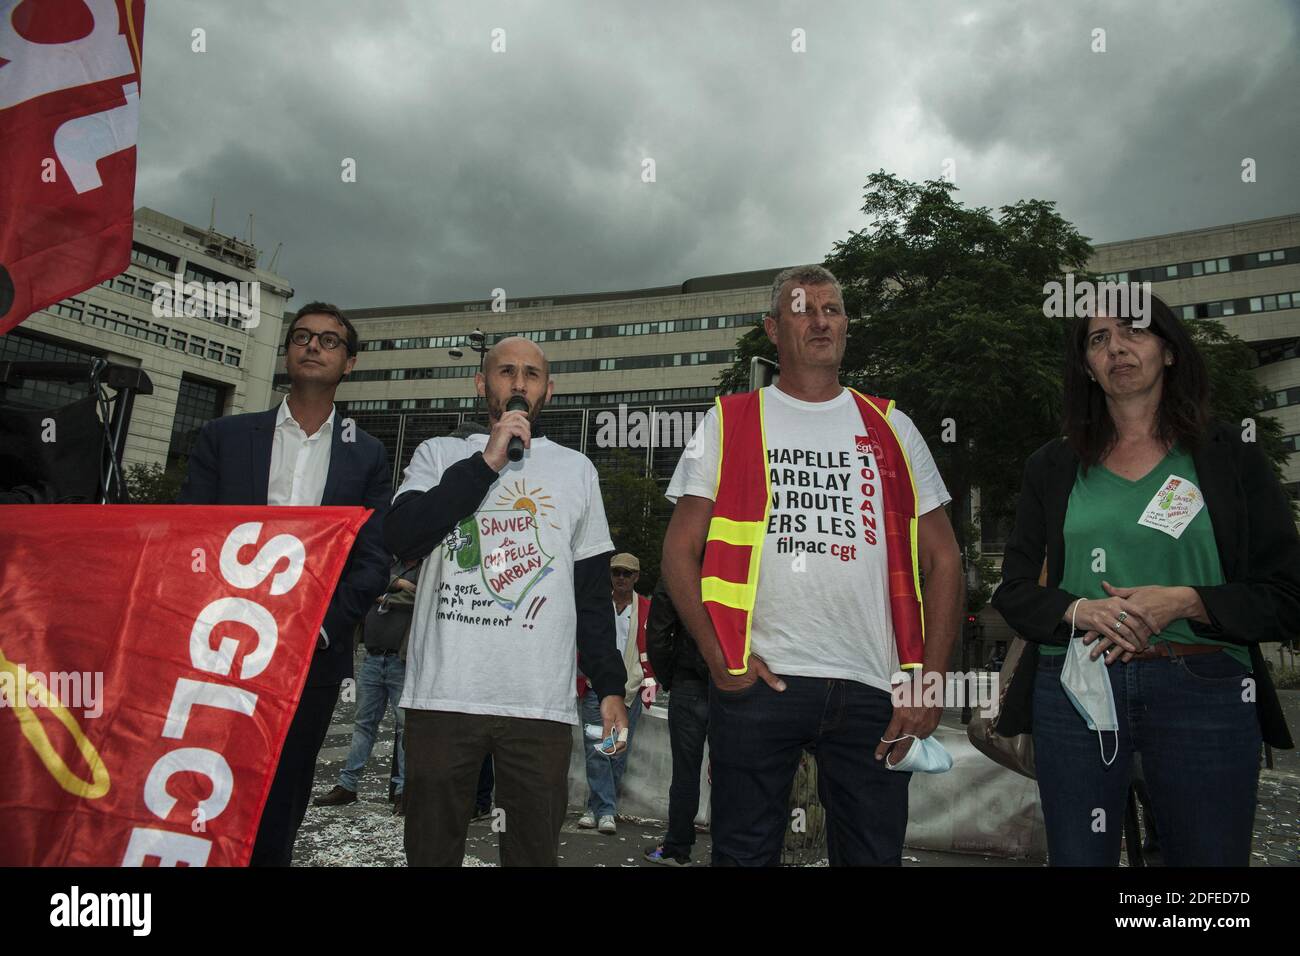 A hundred workers of the paper mill of La Chapelle Darblay stationery store of Grand-Couronne demonstrate outside the Ministry of Economy and Finance, in Paris-Bercy, on Wednesday July 01, 2020. Arnaud Dauxerre, Julien Senecal, Nathalie Verdeil and Pascal Morel from a delegation of them were received at midday at the ministry to take stock of the future of stationery. Workers representatives return in Bercy after the meeting without seeing results. They will receive their letters of dismissal in mid-July. Photo by Pierrick Villette/Avenir Pictures/ABACAPRESS.COM Stock Photo